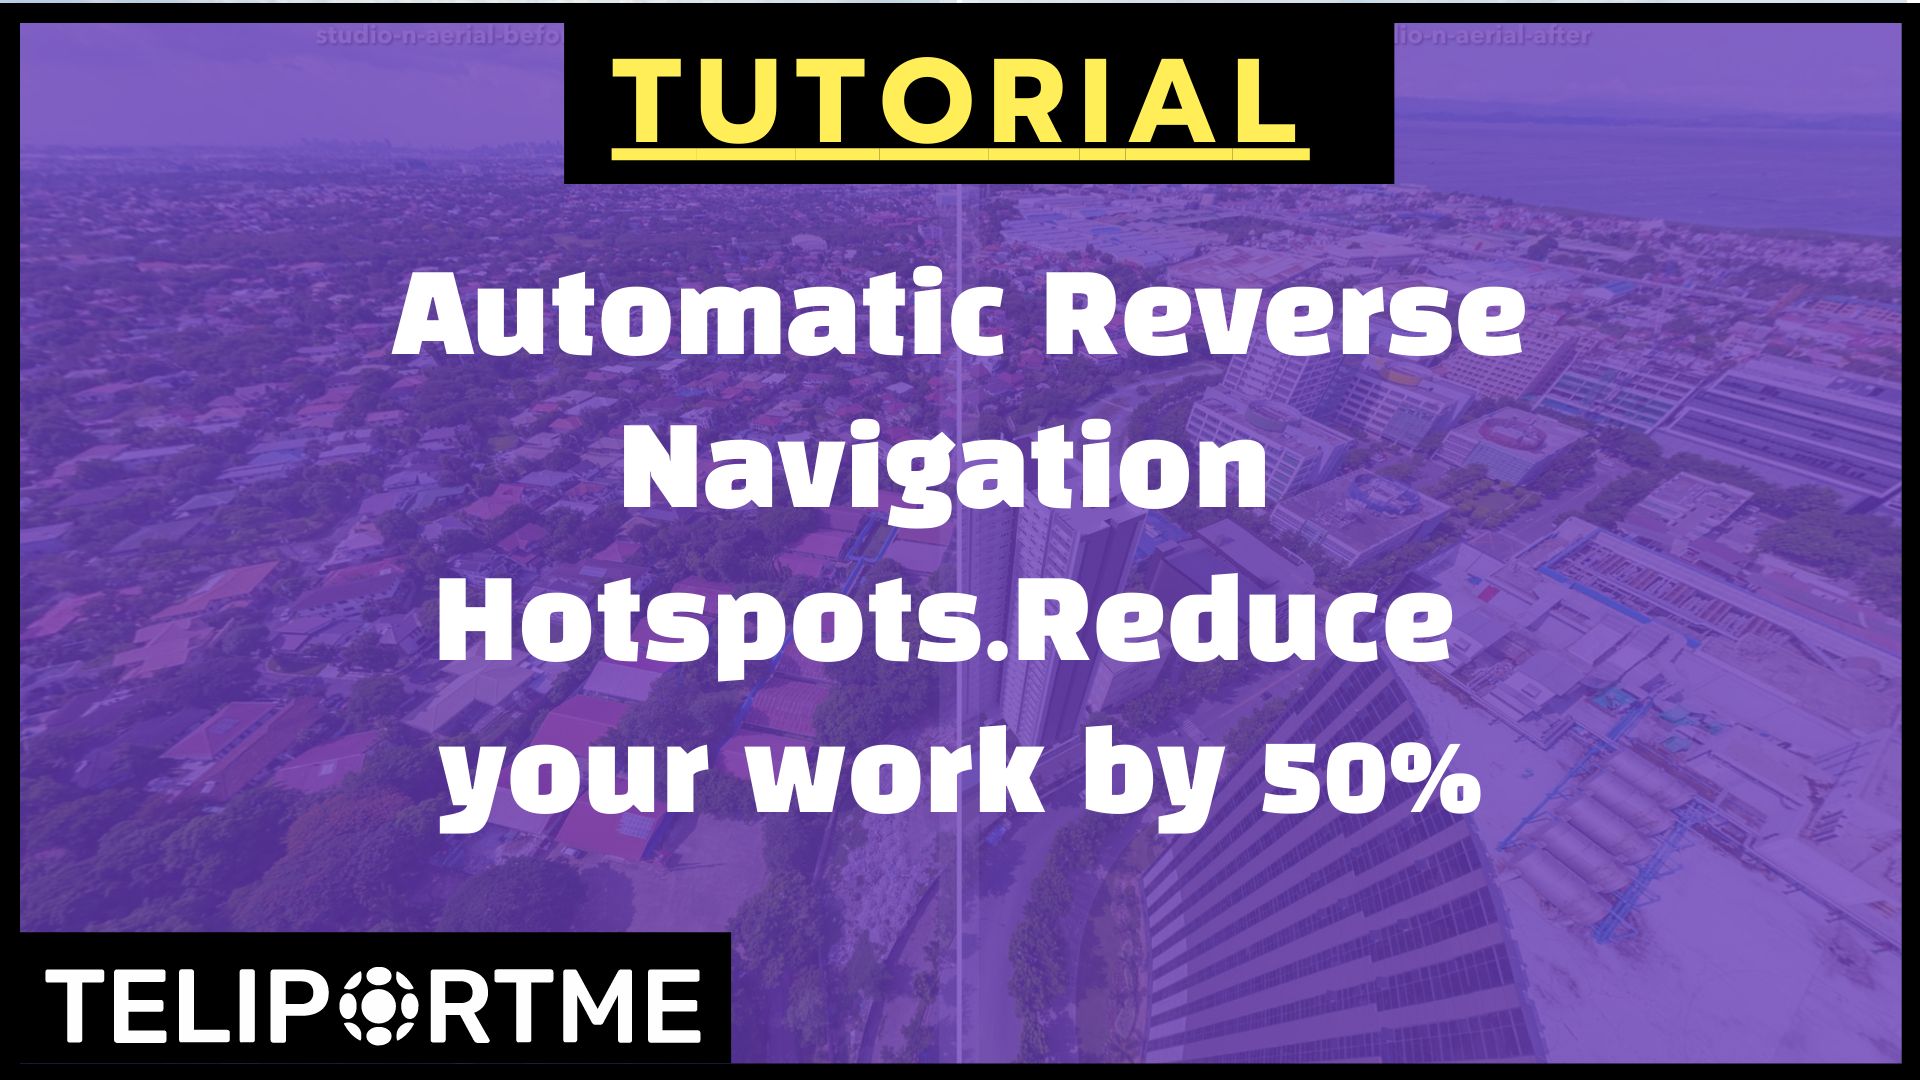 Automatically add Reverse Hotspots - 2X your effeciency